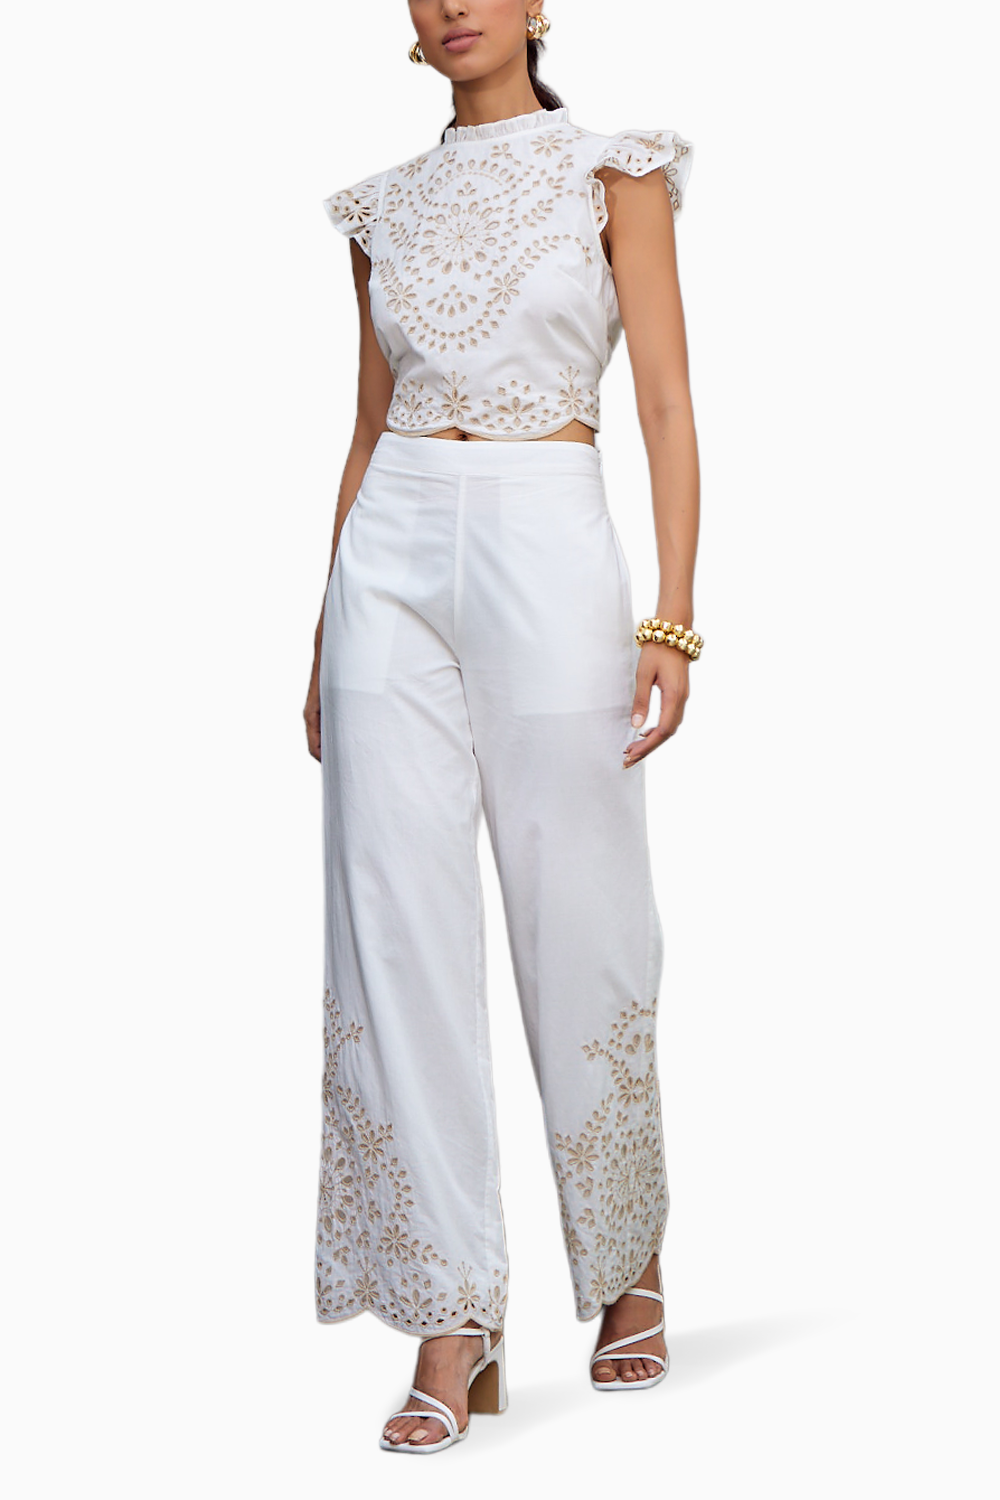 Romneya White Embroidered Co-Ord Set